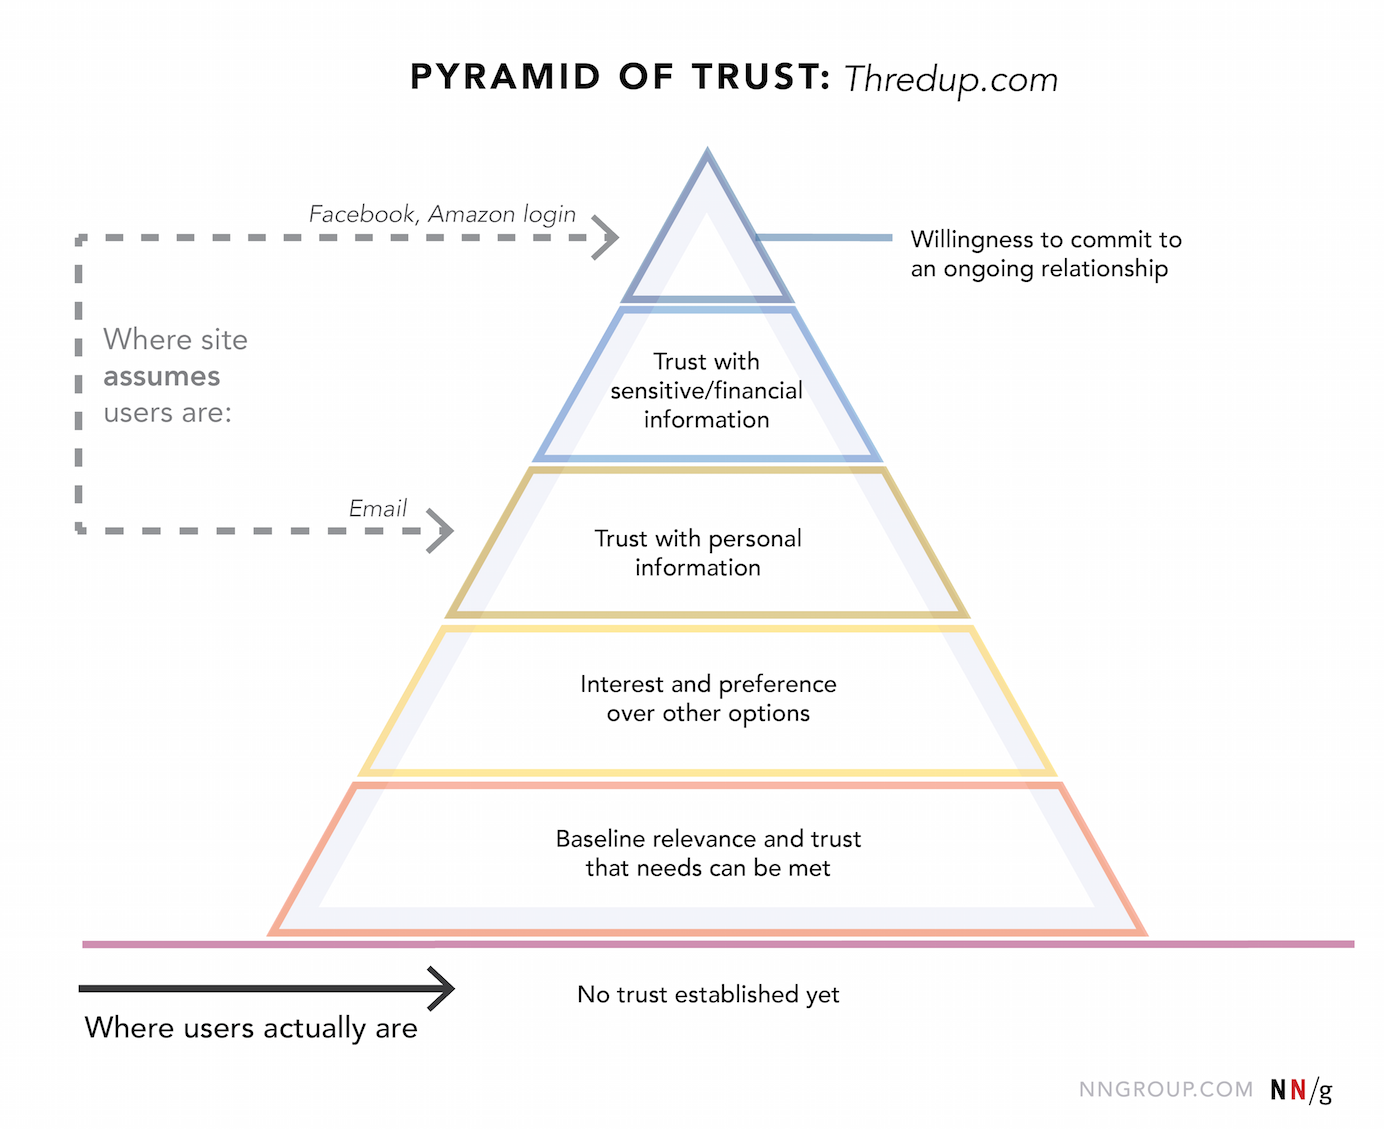 The pyramid of trust for Thredup.com shows where the site assumes users are compared to where they actually are.